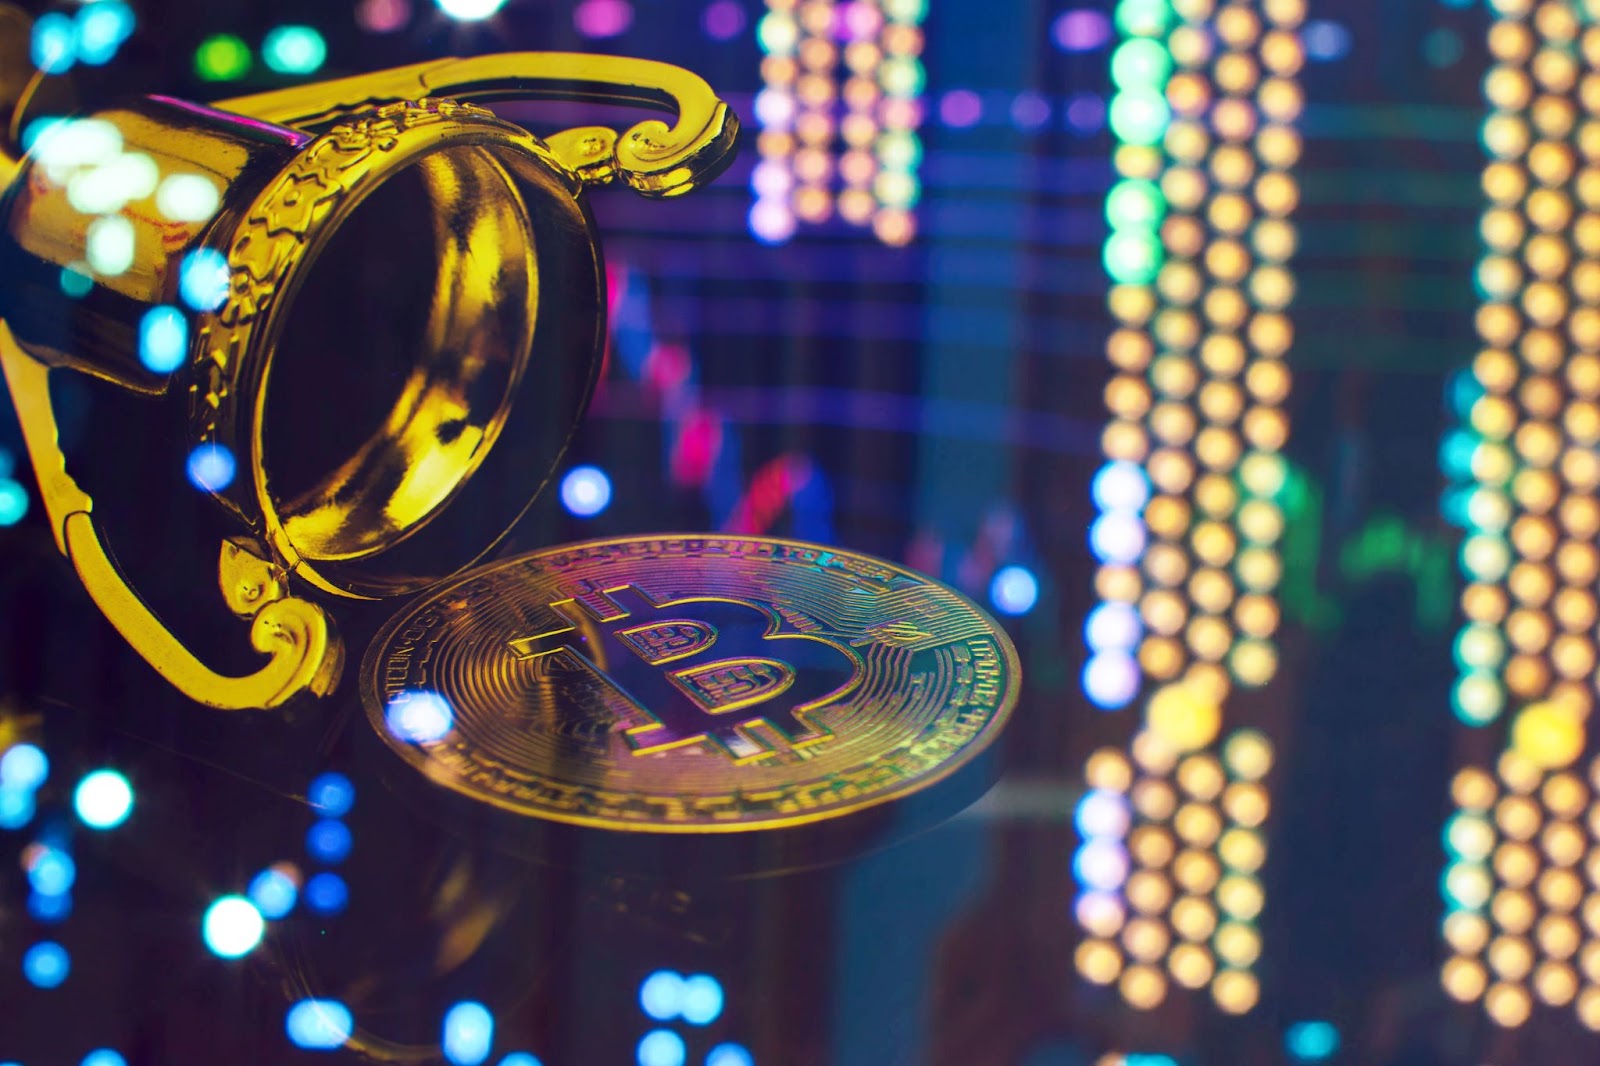 A golden trophy cup tipped over with a Bitcoin coin spilling out, set against a backdrop of vibrant, colorful bokeh lights.